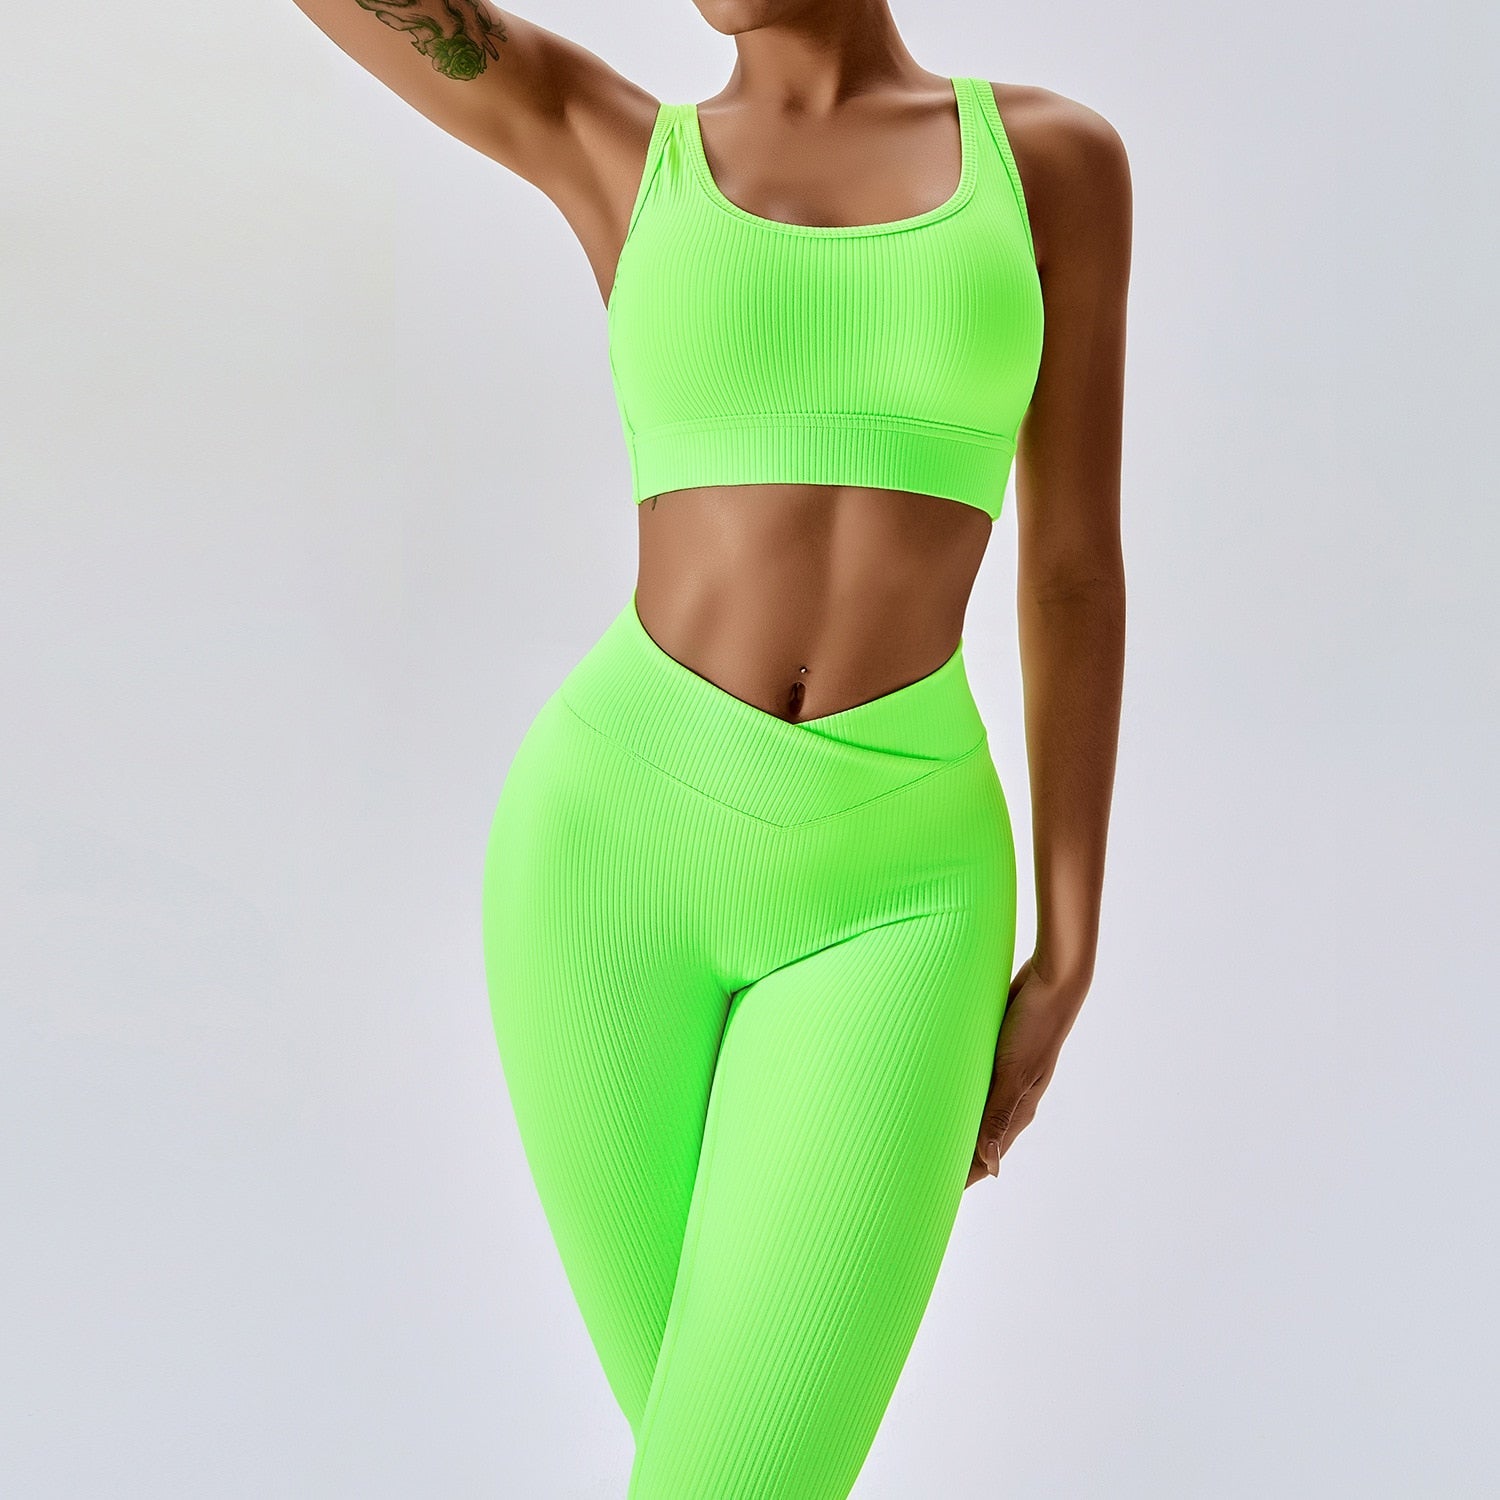 Ribbed Yoga Set Sportswear Women Suit For Fitness Clothing Sports Suit Workout Clothes Tracksuit Sports Outfit Gym Clothing Wear GreenSet-3XLChina  71.99 EZYSELLA SHOP